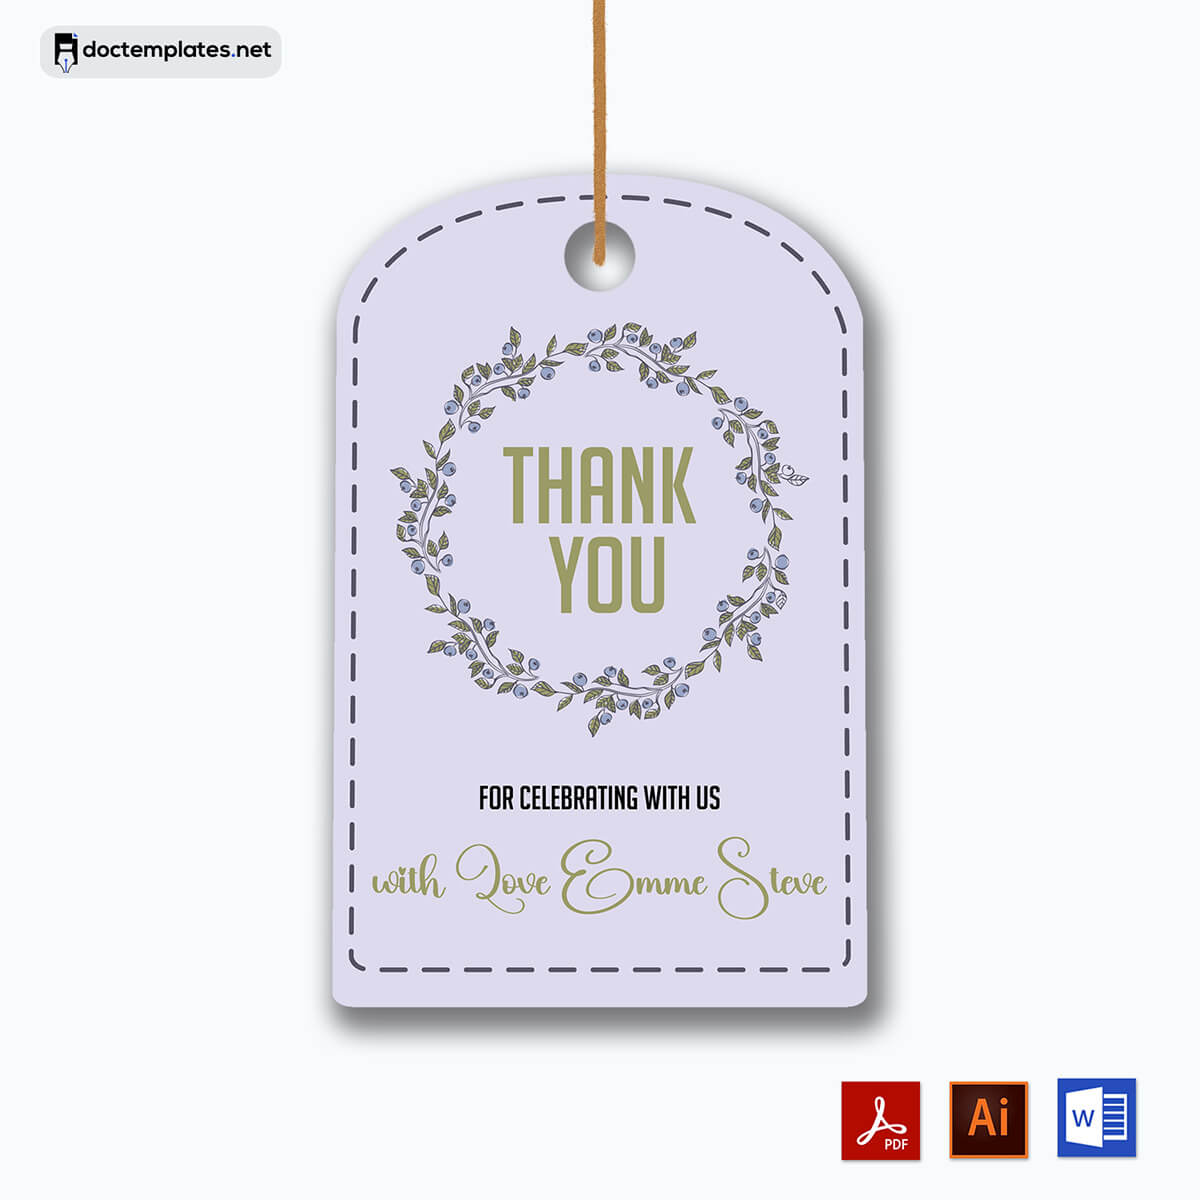 Gift Tags like Never Before - Adobe Illustrator Templates